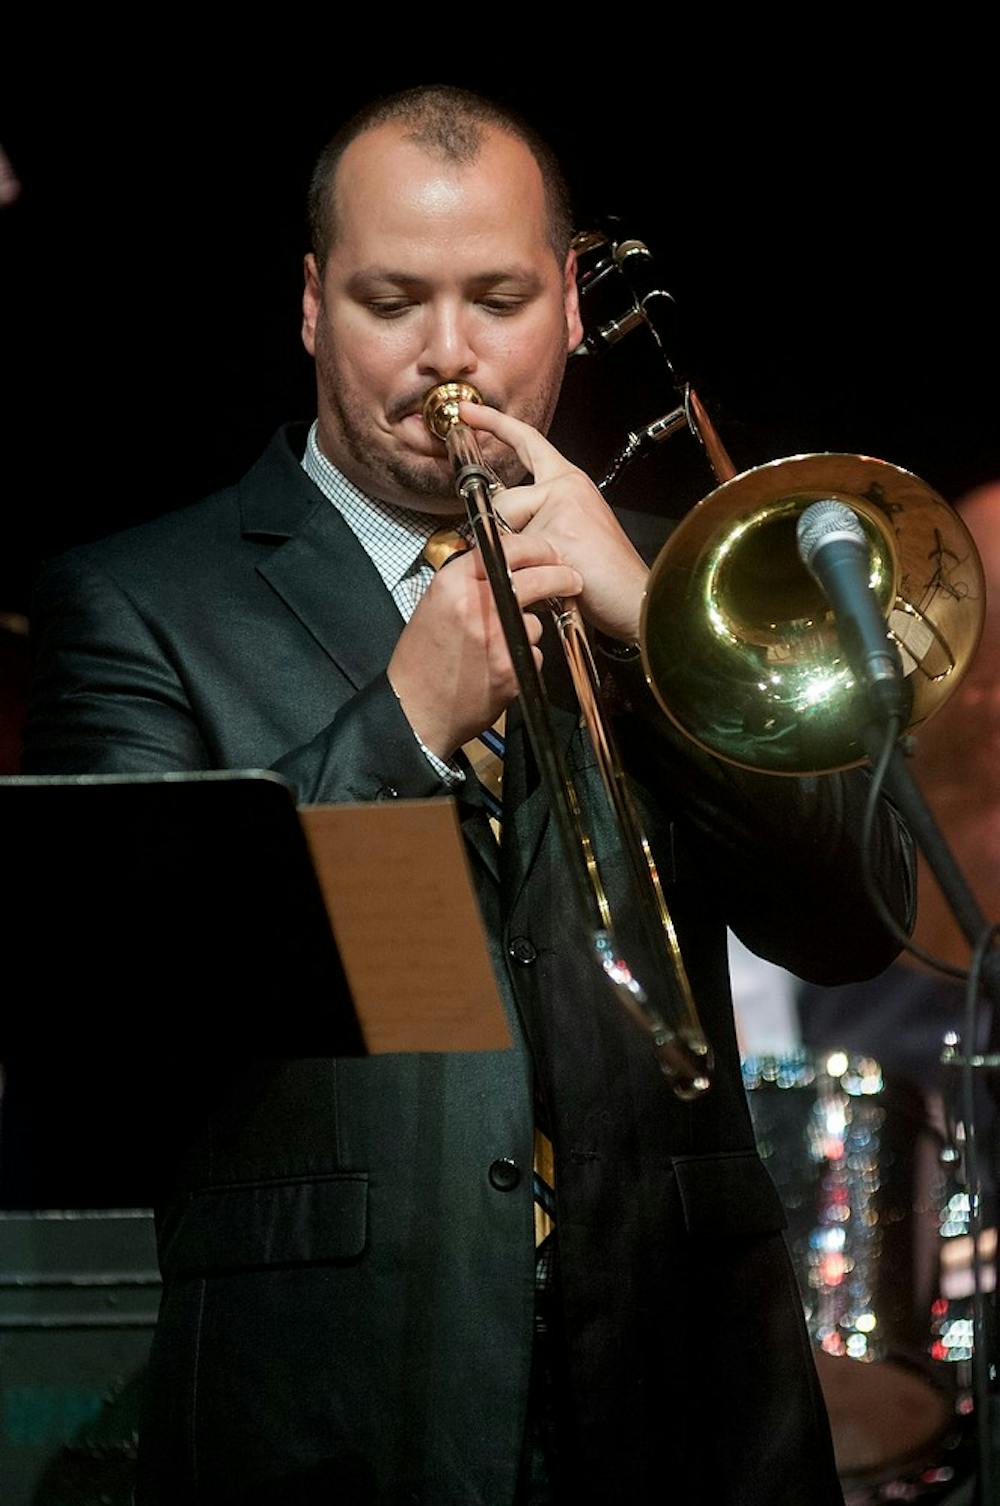 	<p>Assistant professor of jazz trombone Michael Dease plays his instrument during the <span class="caps">MSU</span> Professors of Jazz concert Aug. 28, 2013 at the Pasant Theatre. The professors dedicated the performance to the 50th anniversary of the March on Washington. Katie Stiefel/The State News</p>